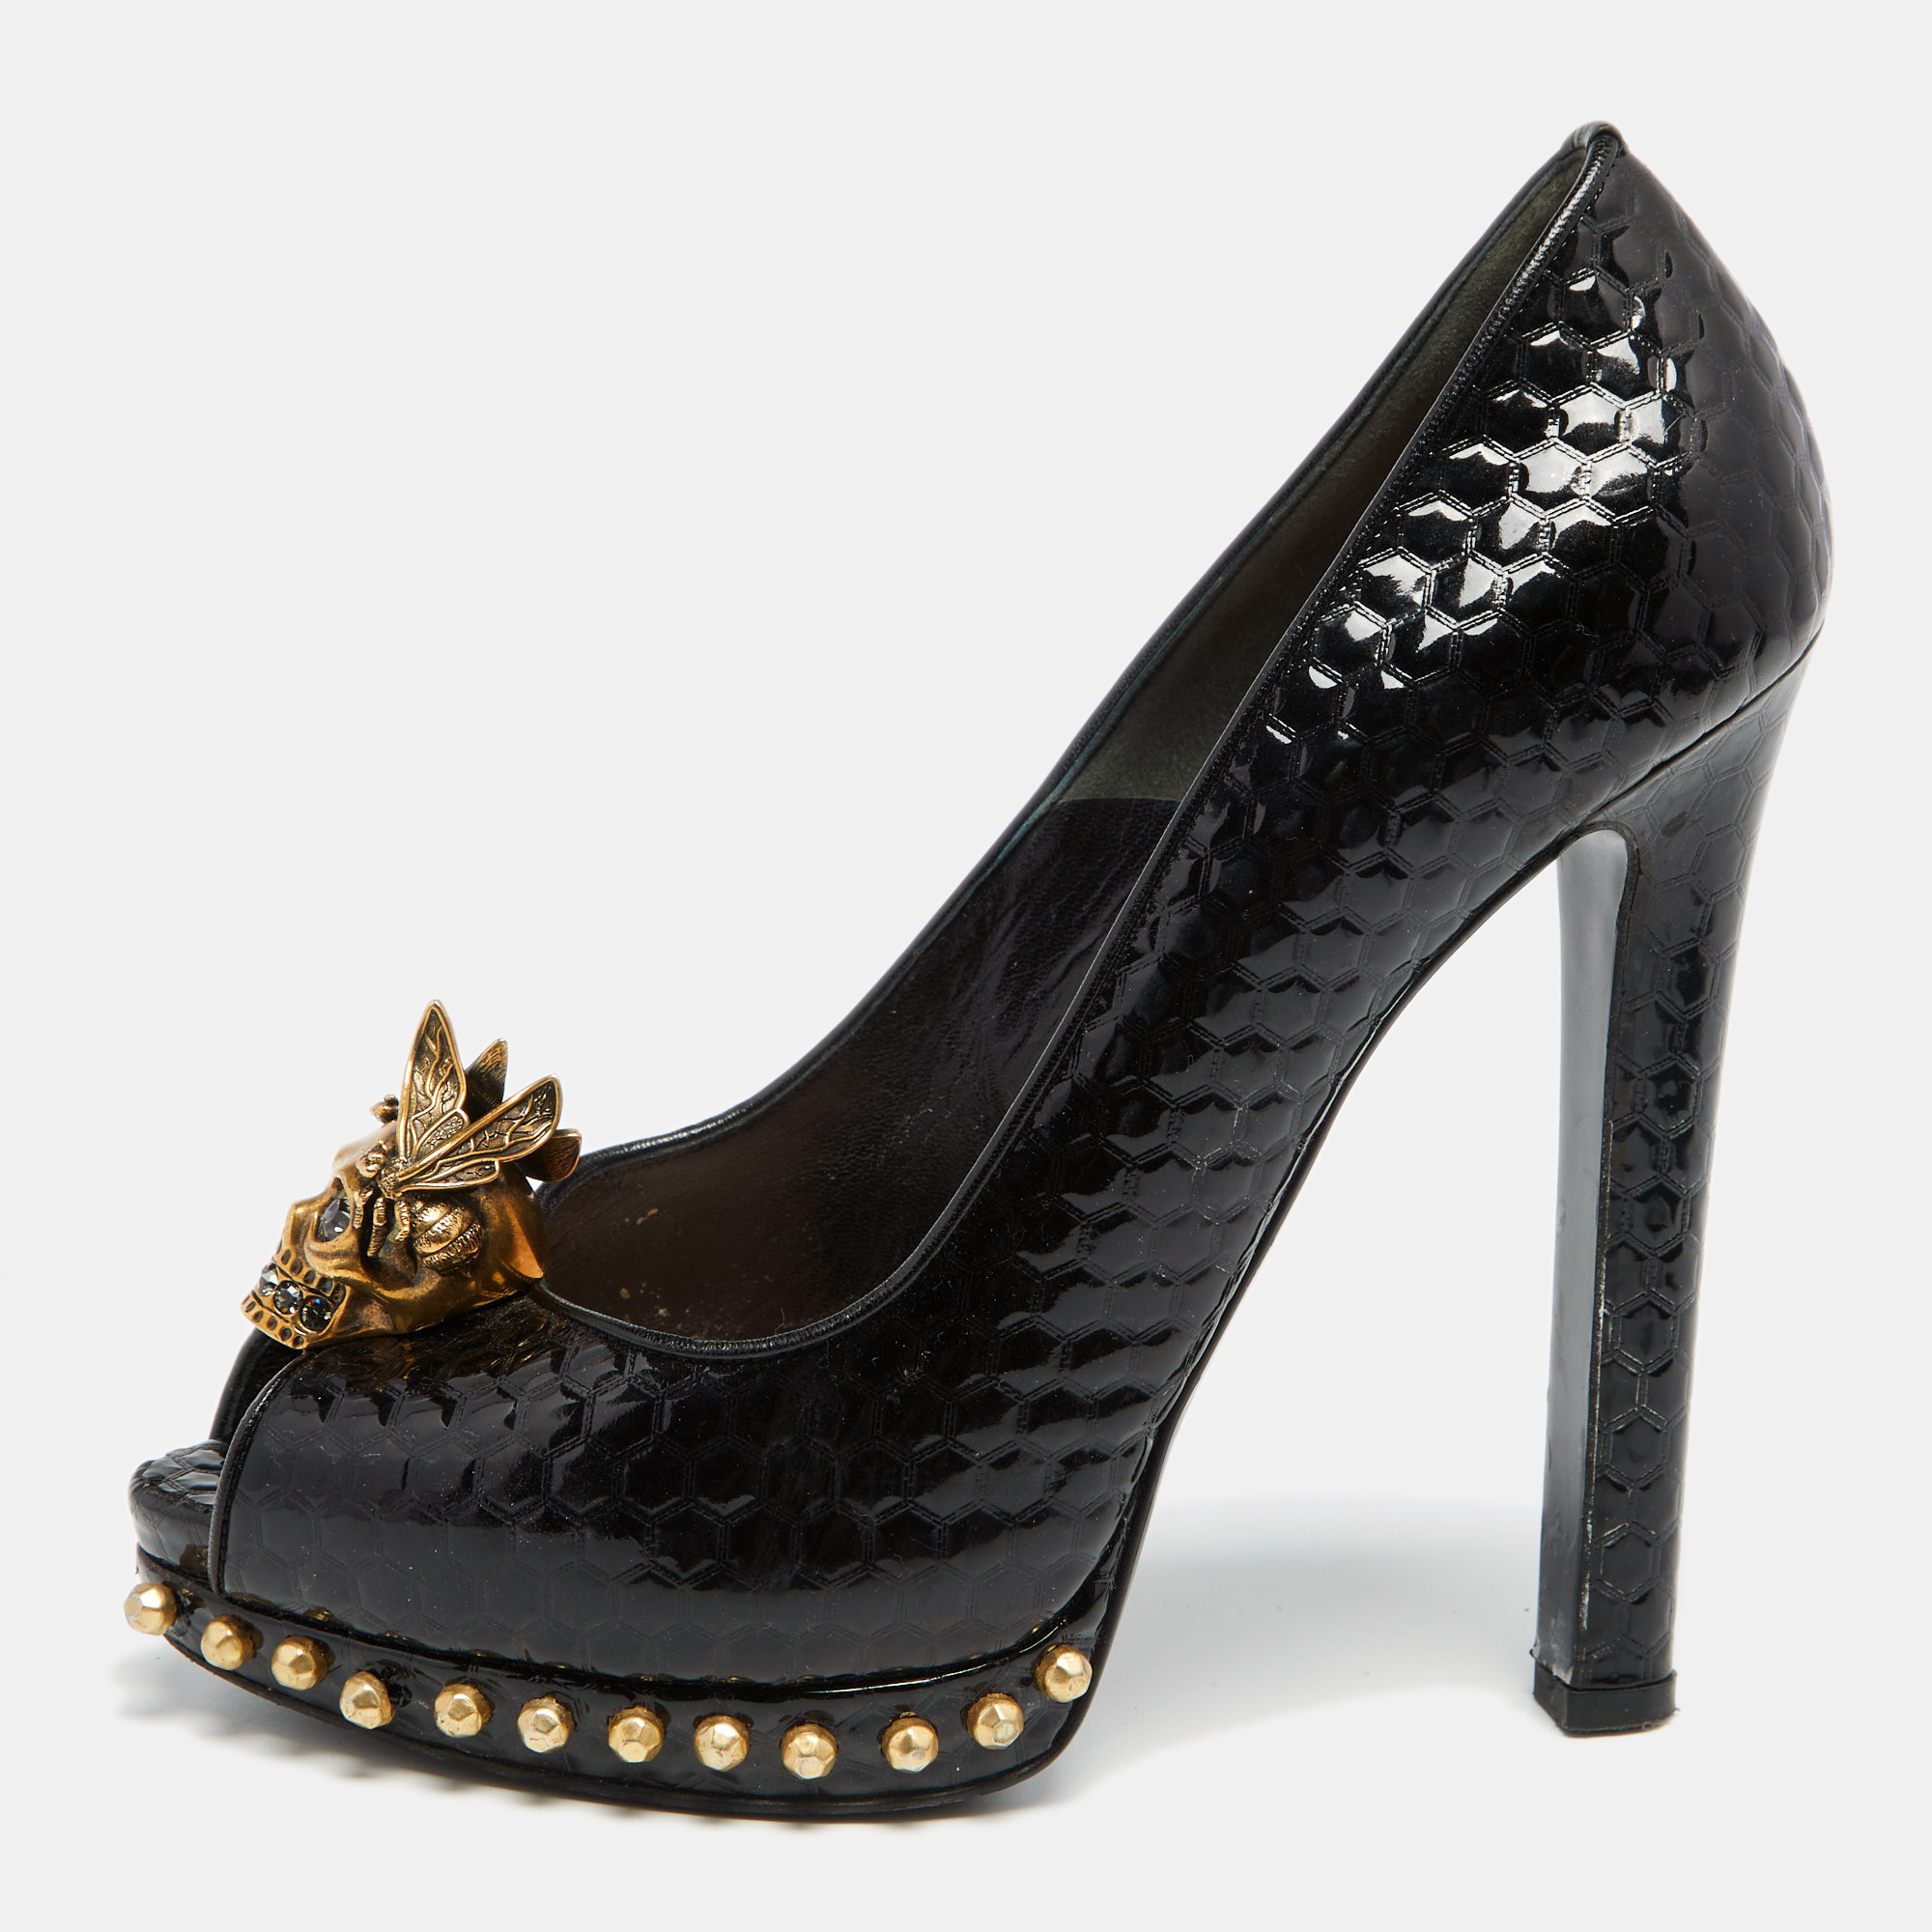 Pre-owned Alexander Mcqueen Black Patent Leather Skull Embellished Peep Toe Pumps Size 38